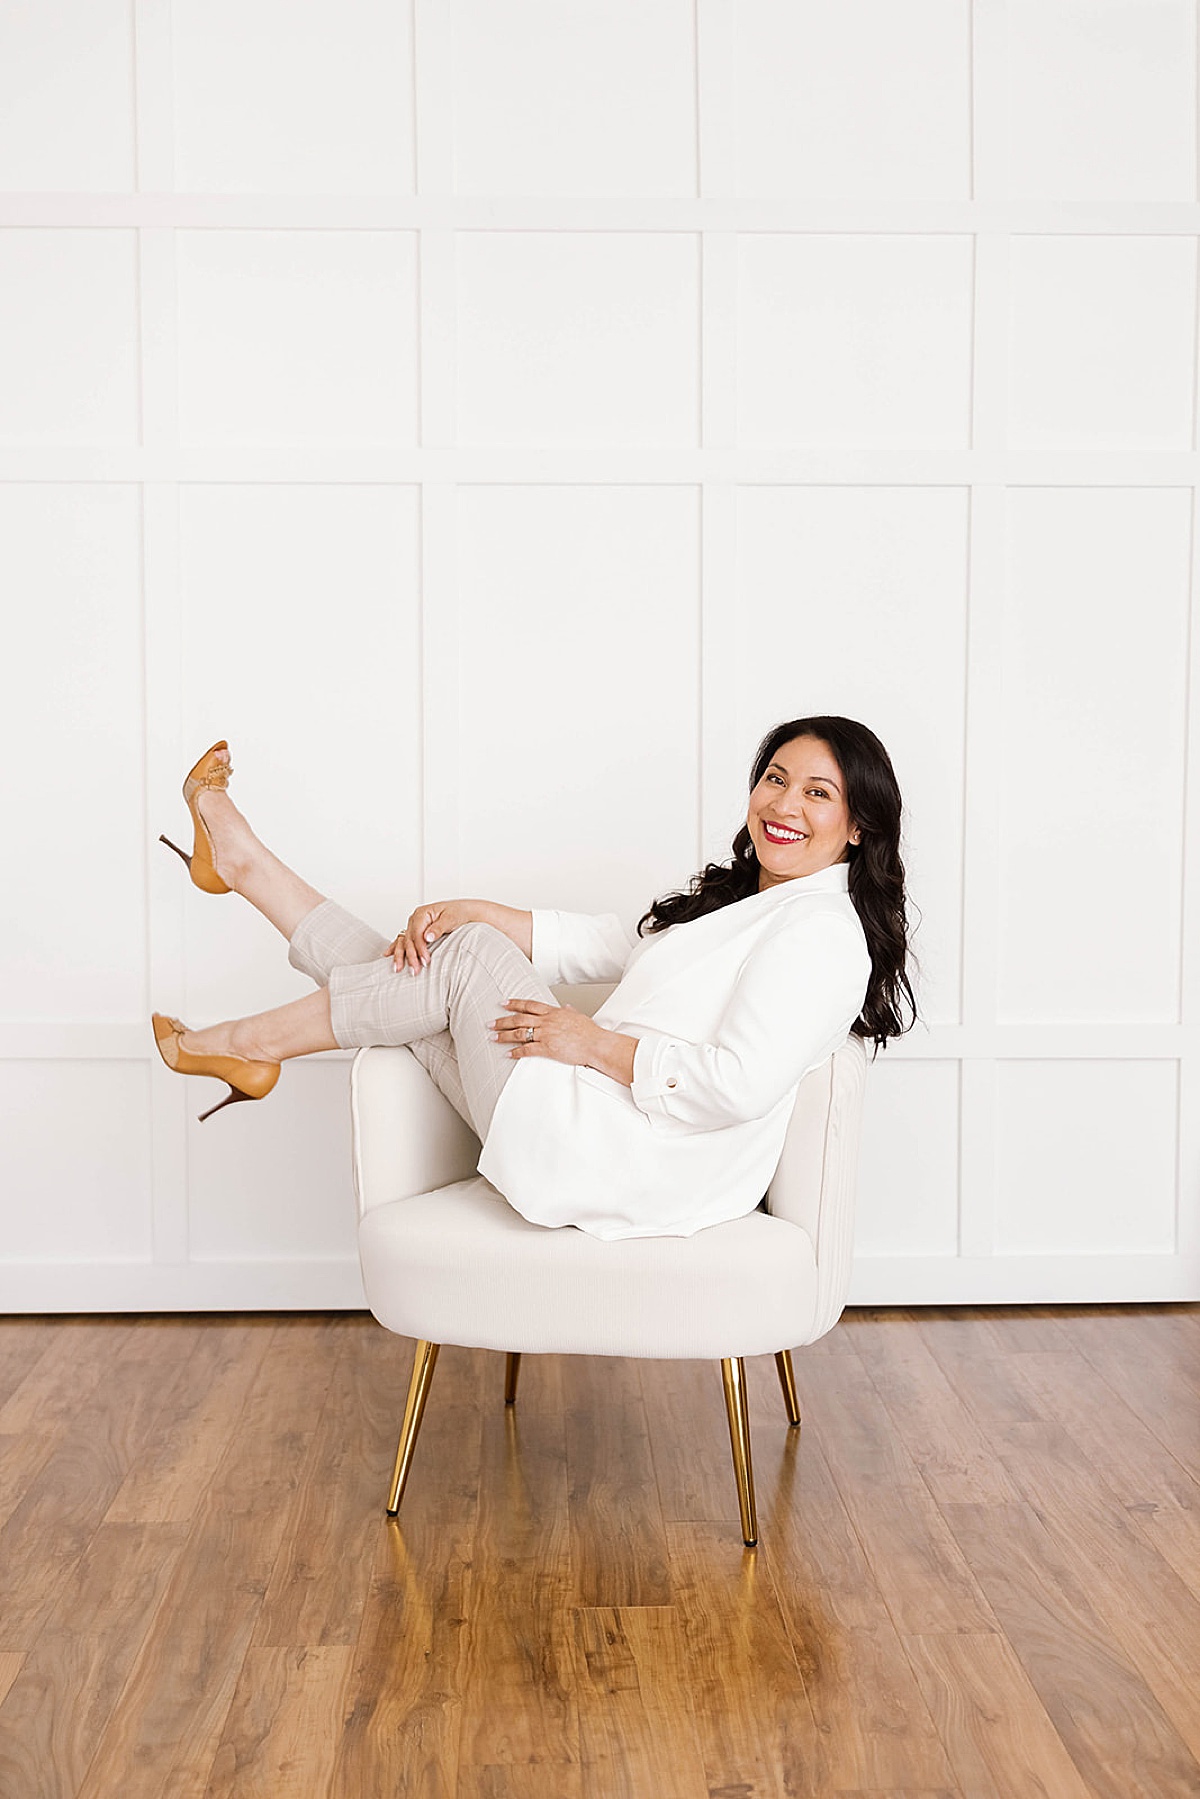 women sitting in chair with her feet up during her brand photo shoots